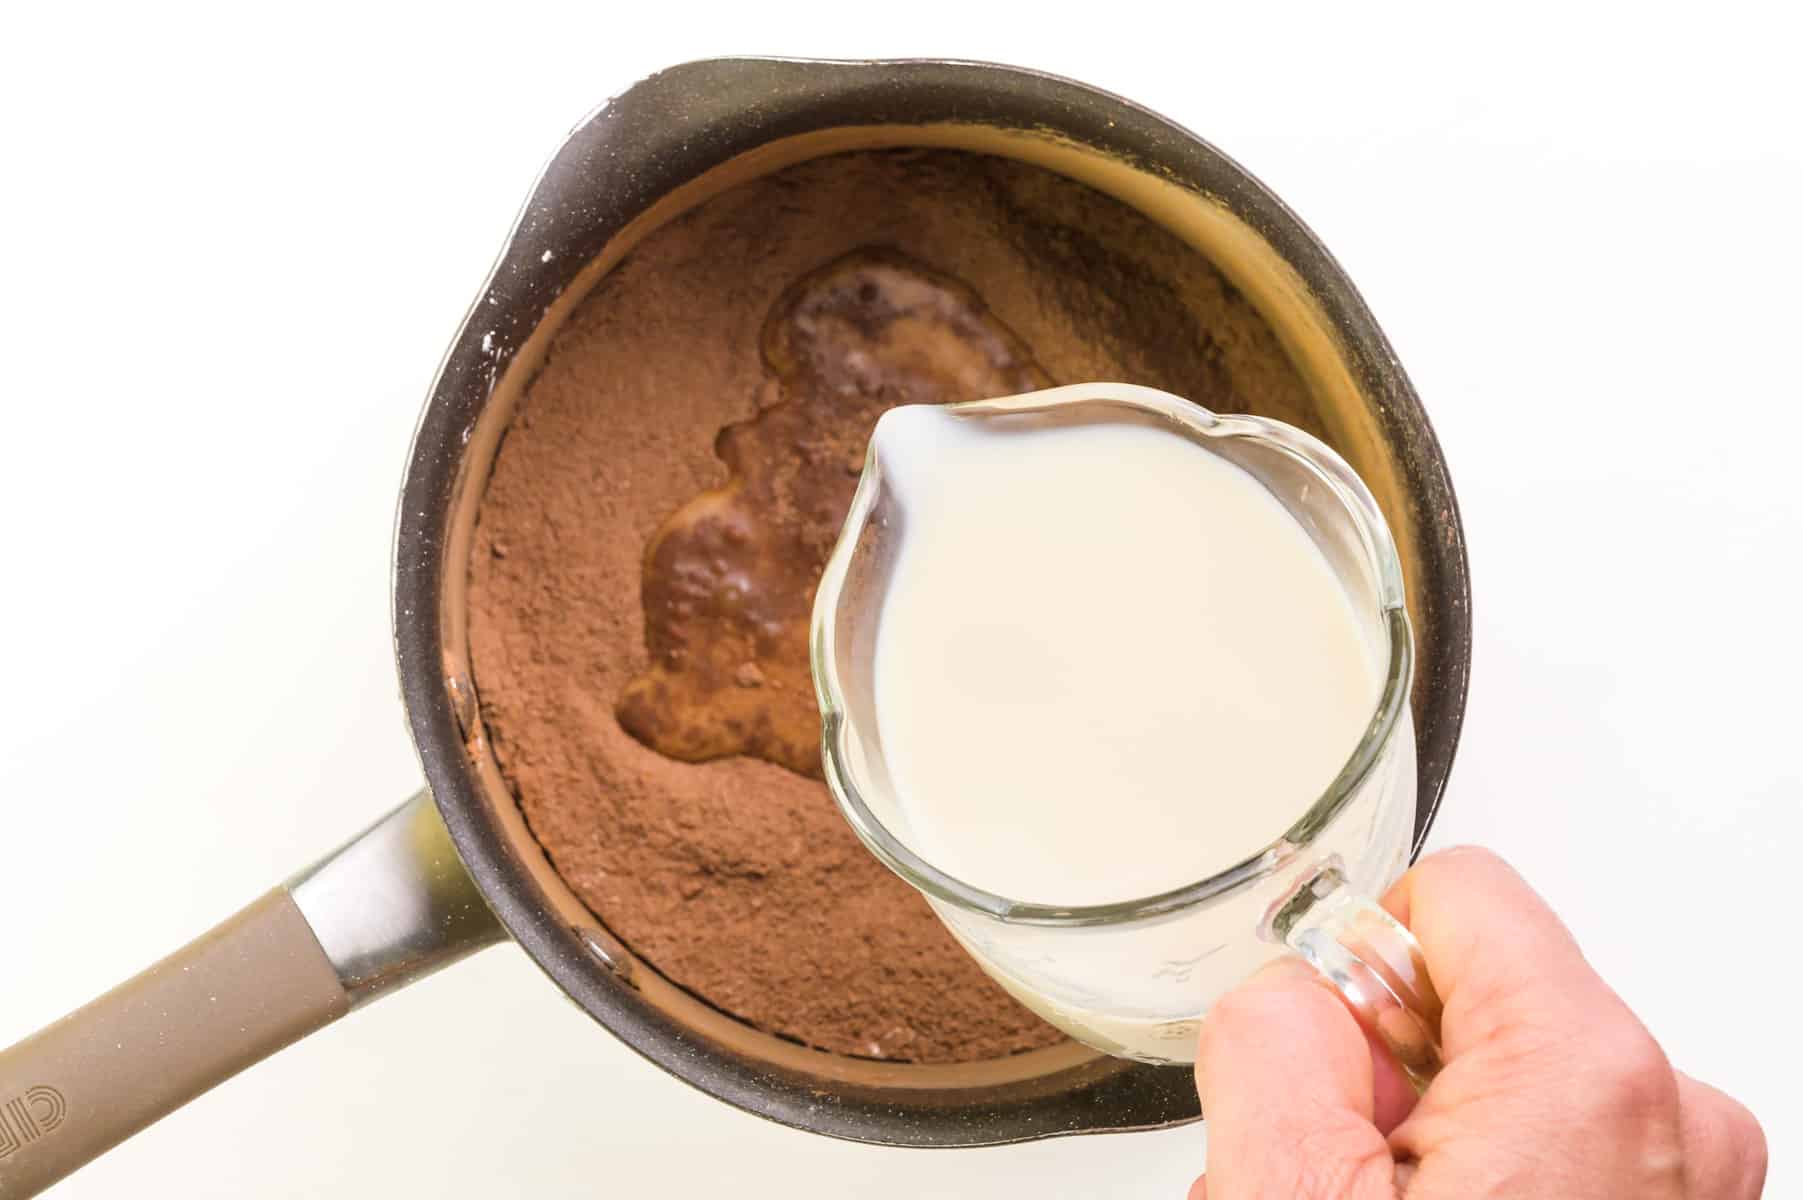 Milk is being poured into a saucepan with a cocoa powder mixture.